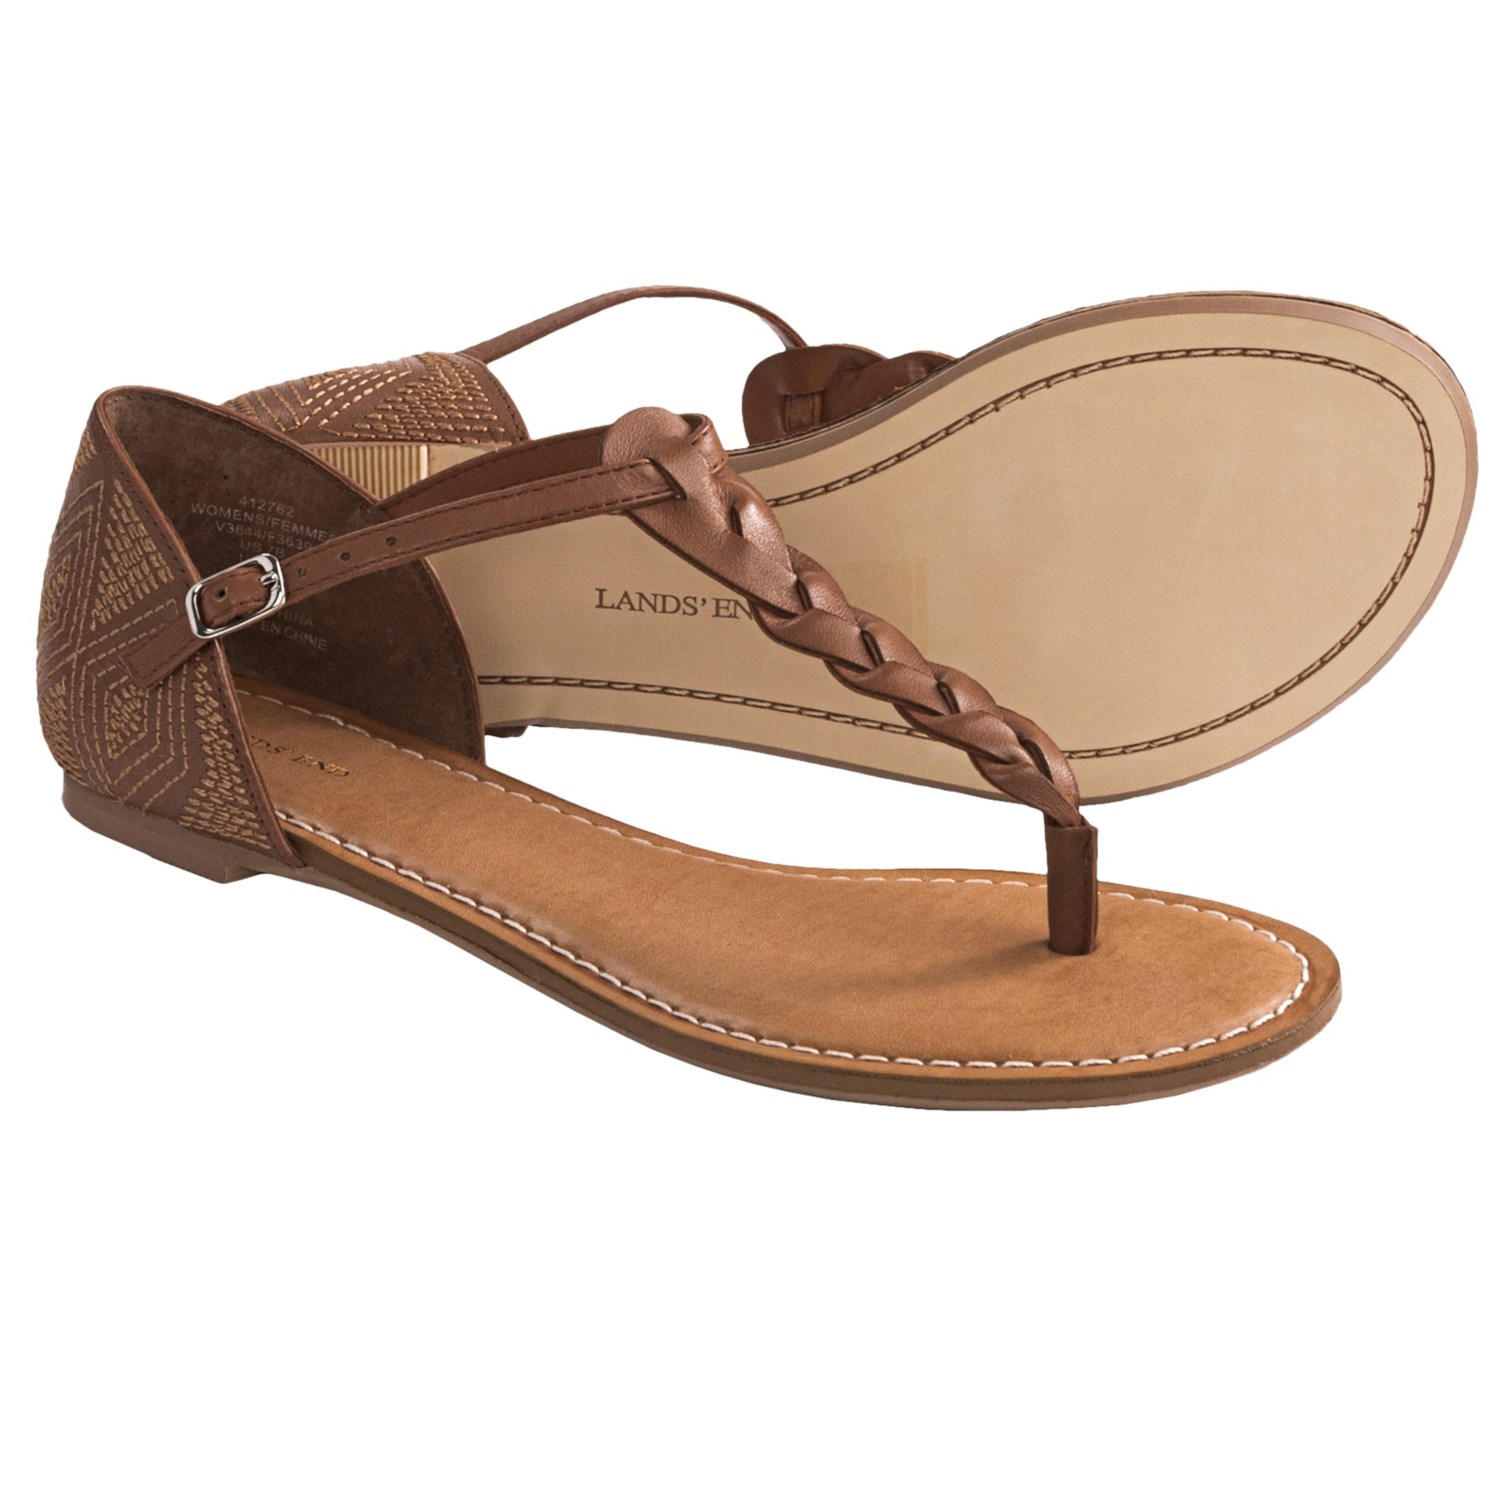 Landsâ€™ End Amelia Thong Sandals - Leather (For Women) in Luggage Tan